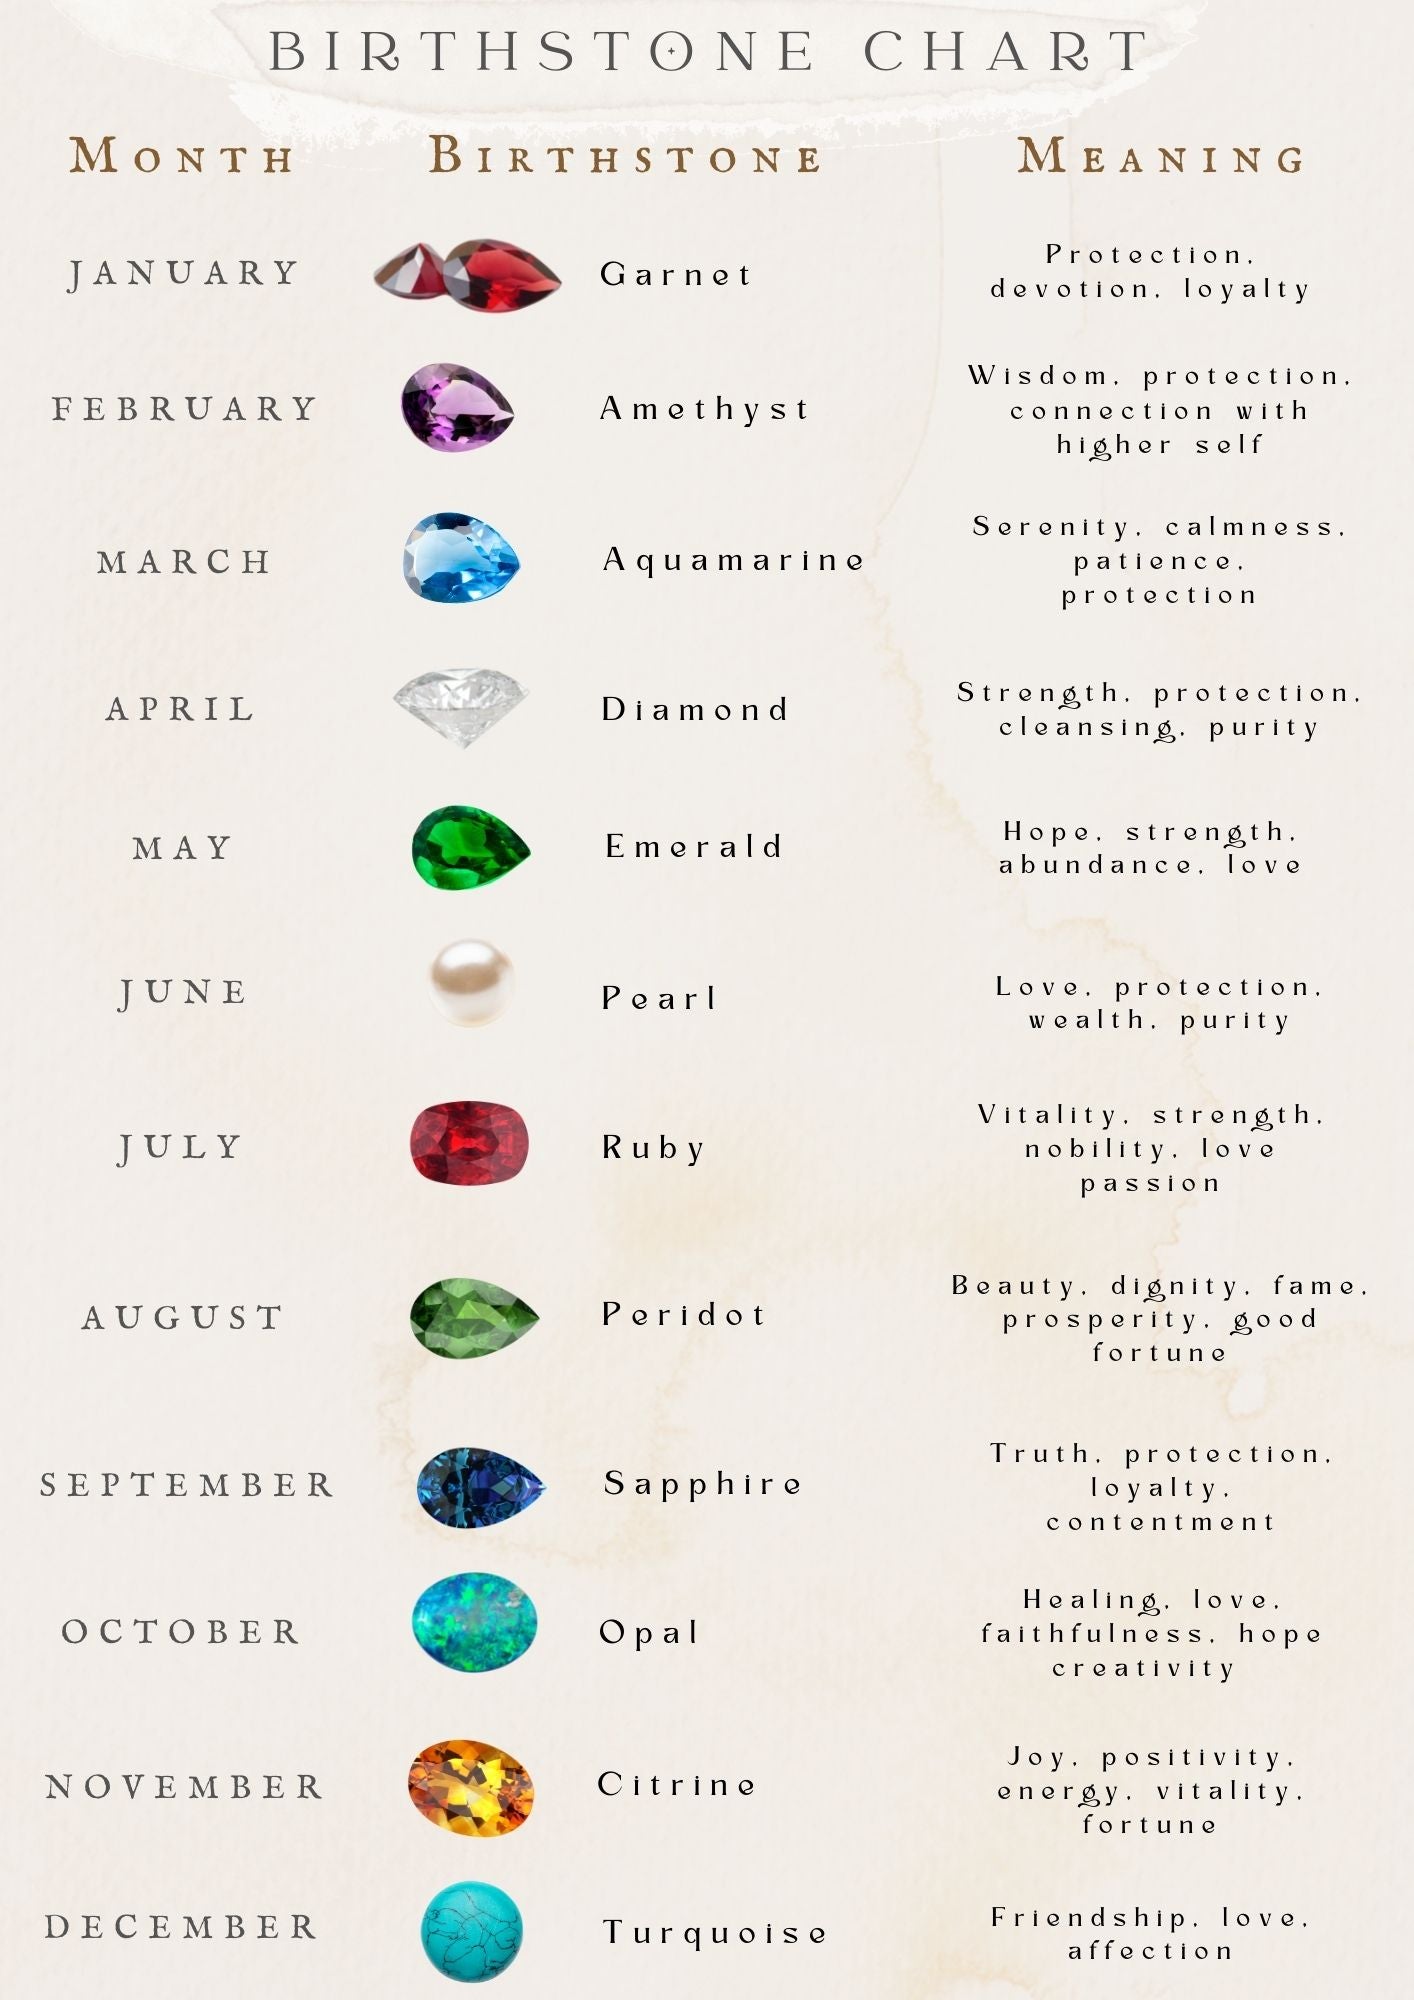 Birthstone Chart including month, gemstone, and meaning